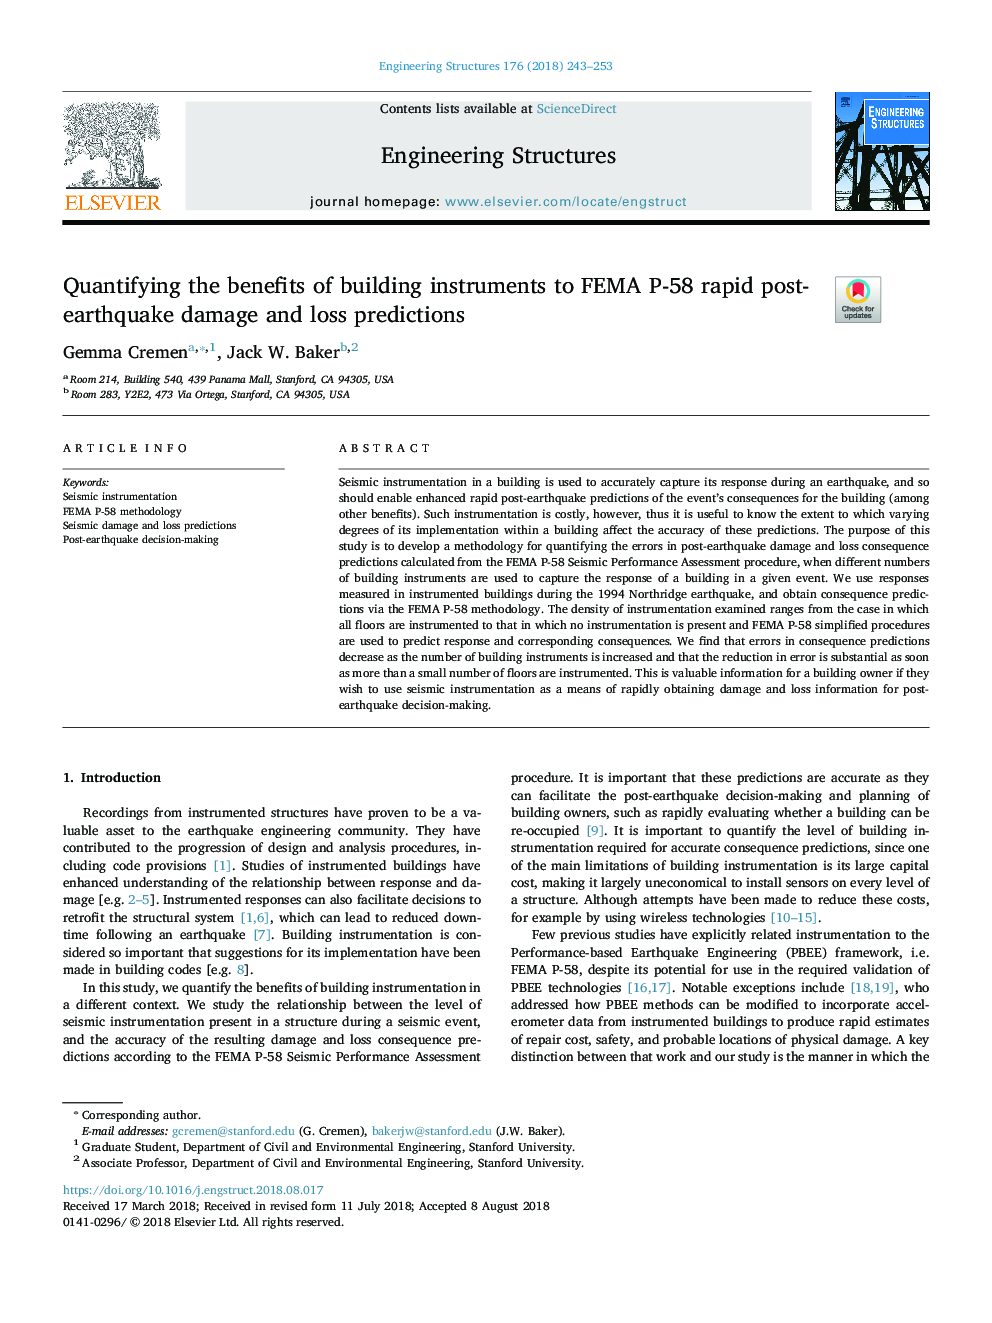 Quantifying the benefits of building instruments to FEMA P-58 rapid post-earthquake damage and loss predictions